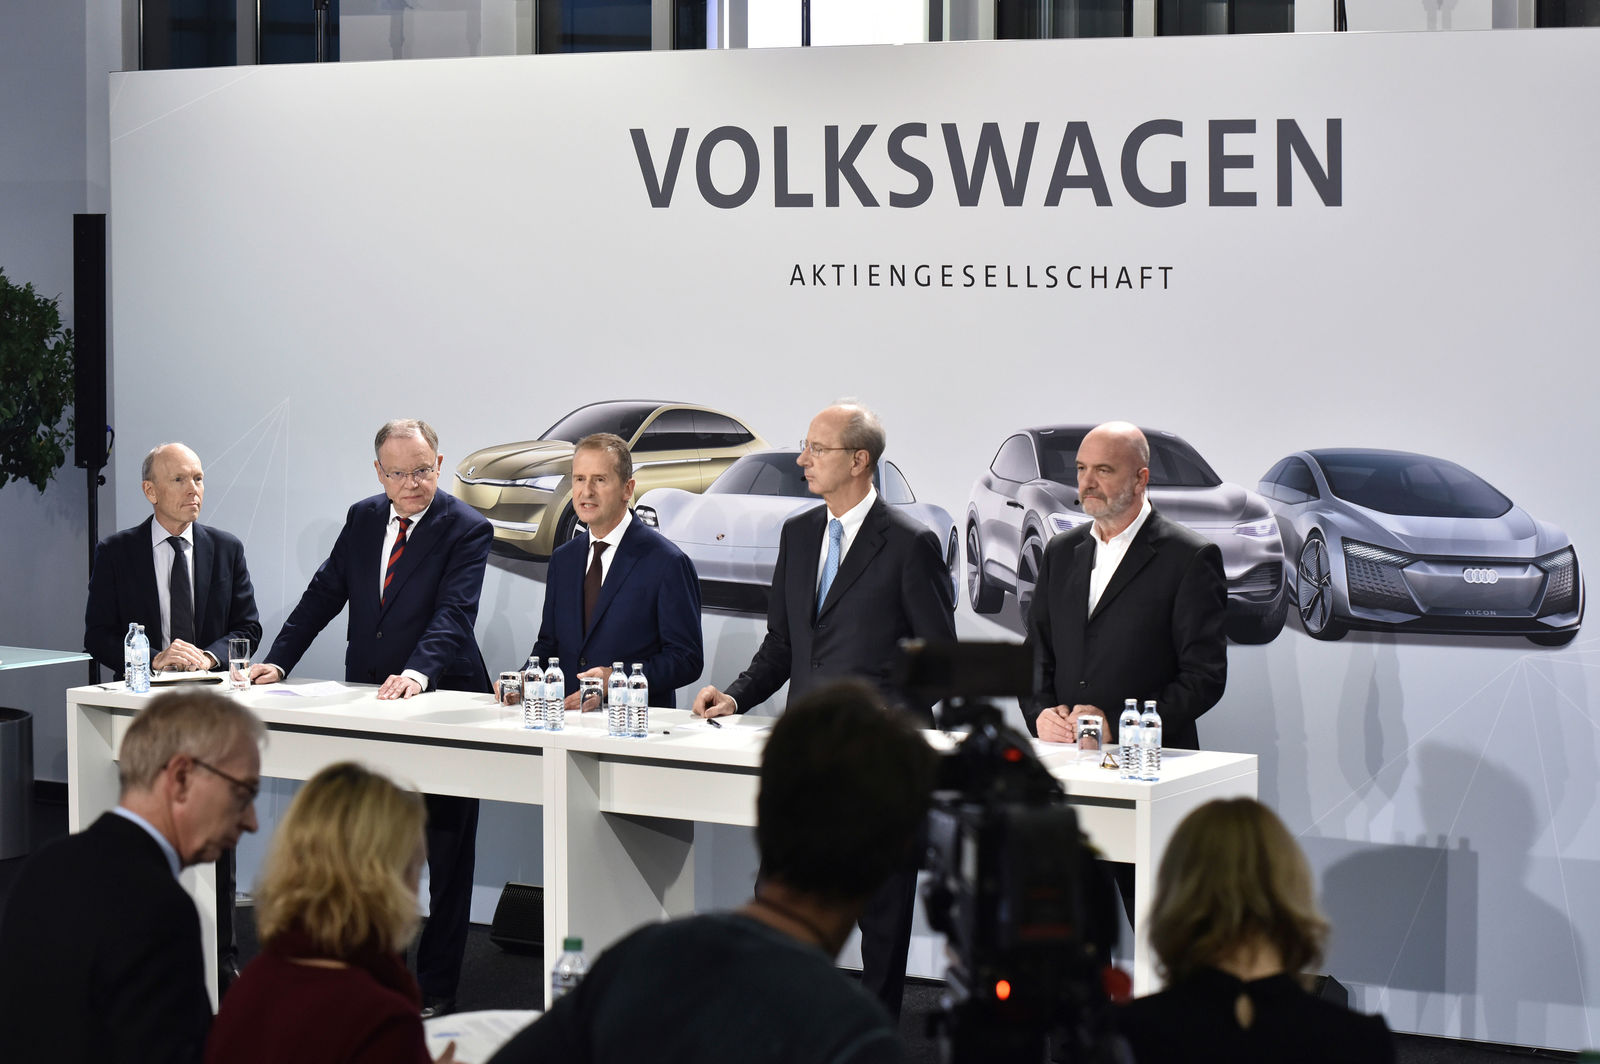 Volkswagen is investing in the future